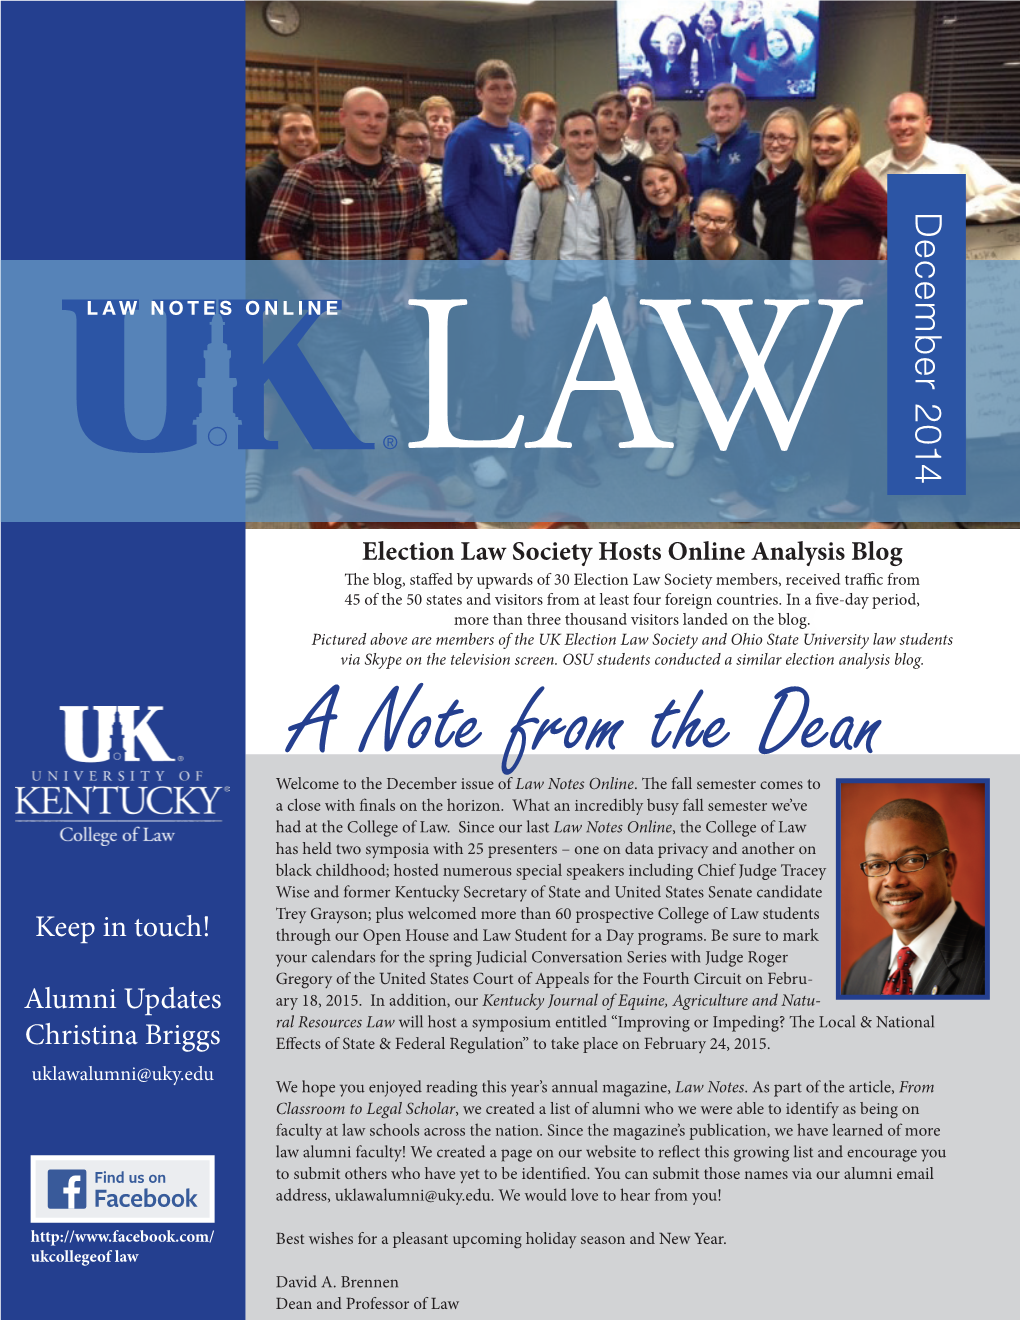 A Note from the Dean Welcome to the December Issue of Law Notes Online